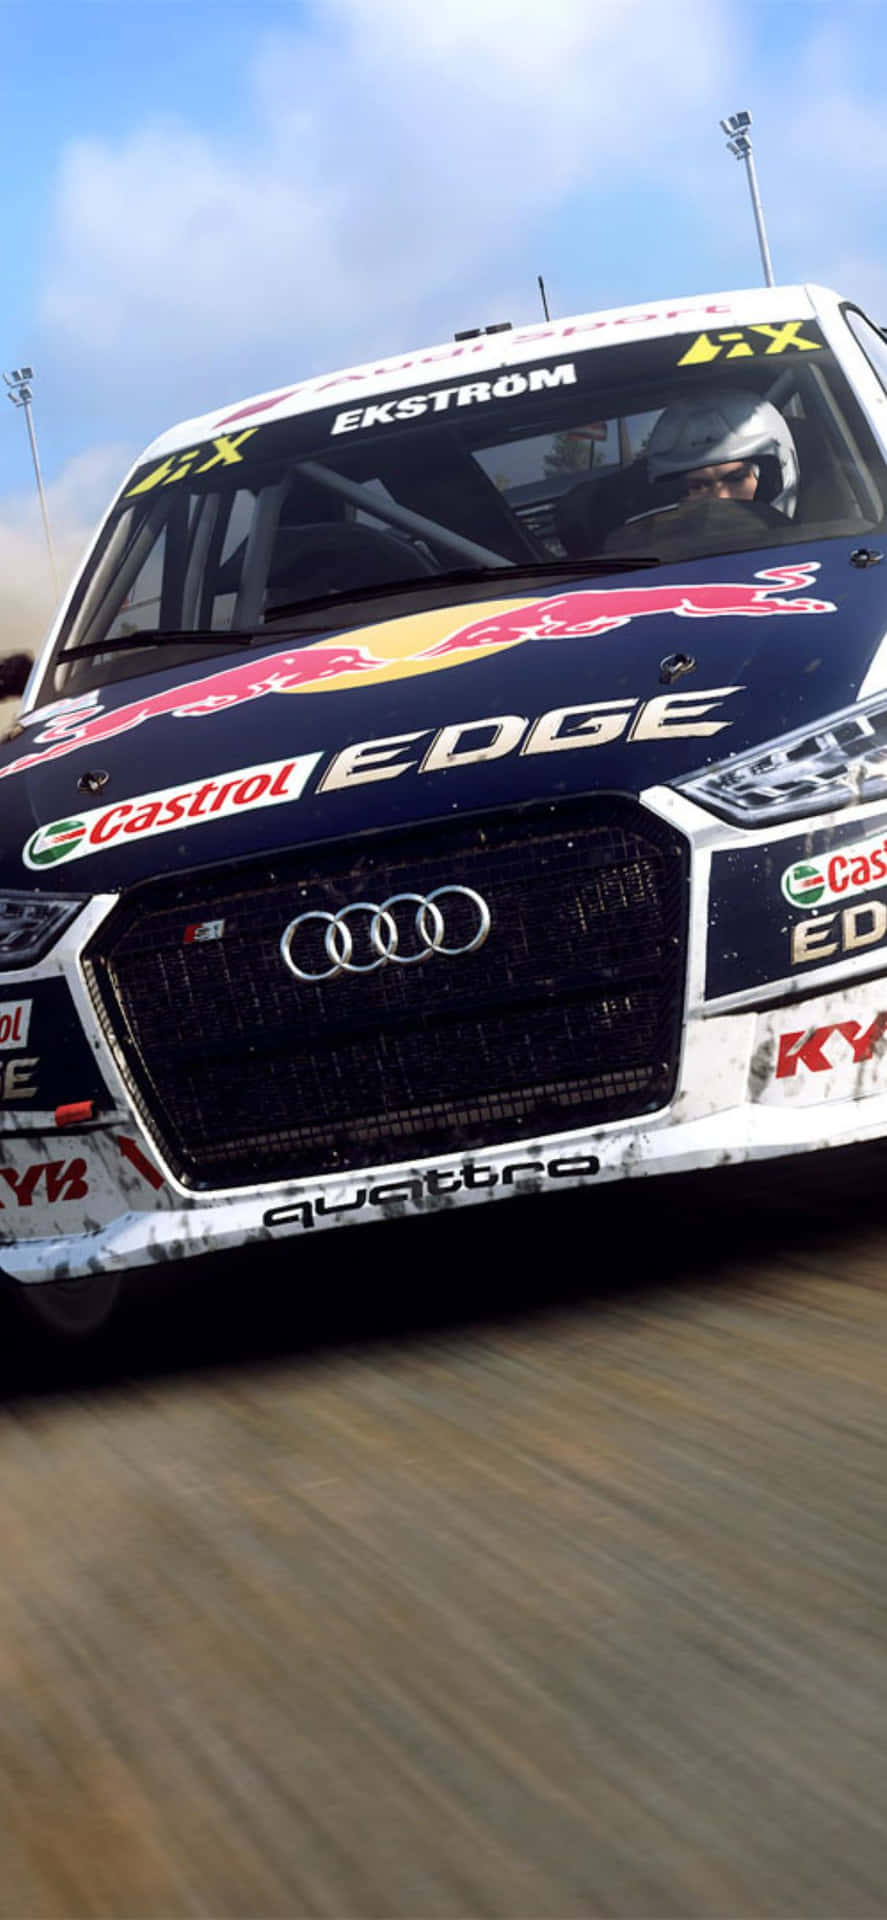 Conquistadirt Rally Con L'iphone X